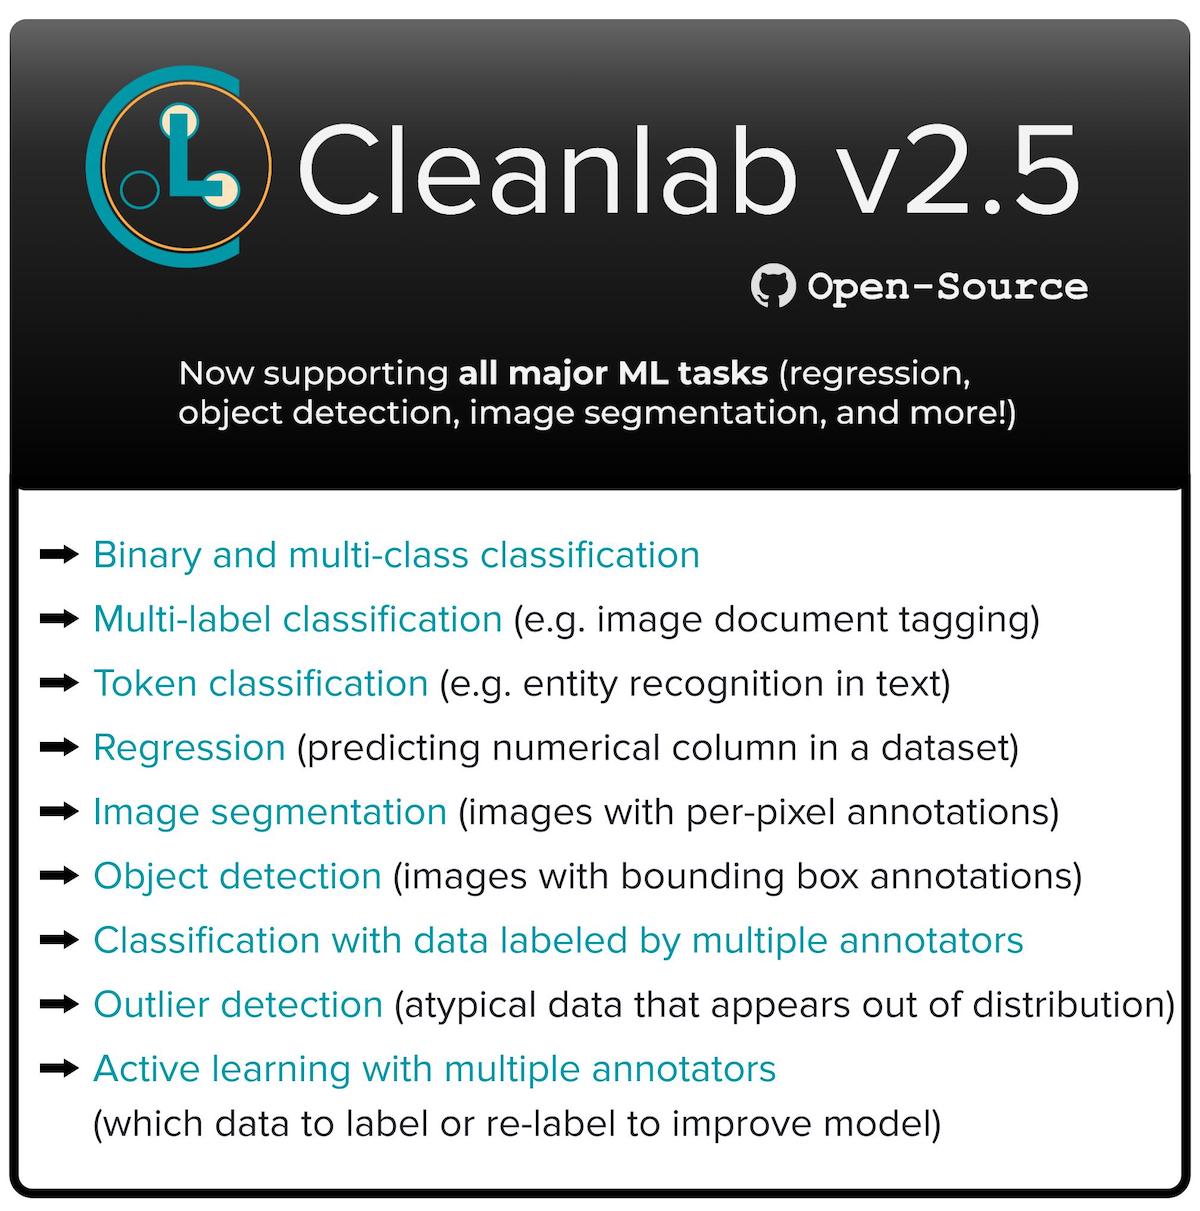 All of the ML tasks supported via cleanlab package.